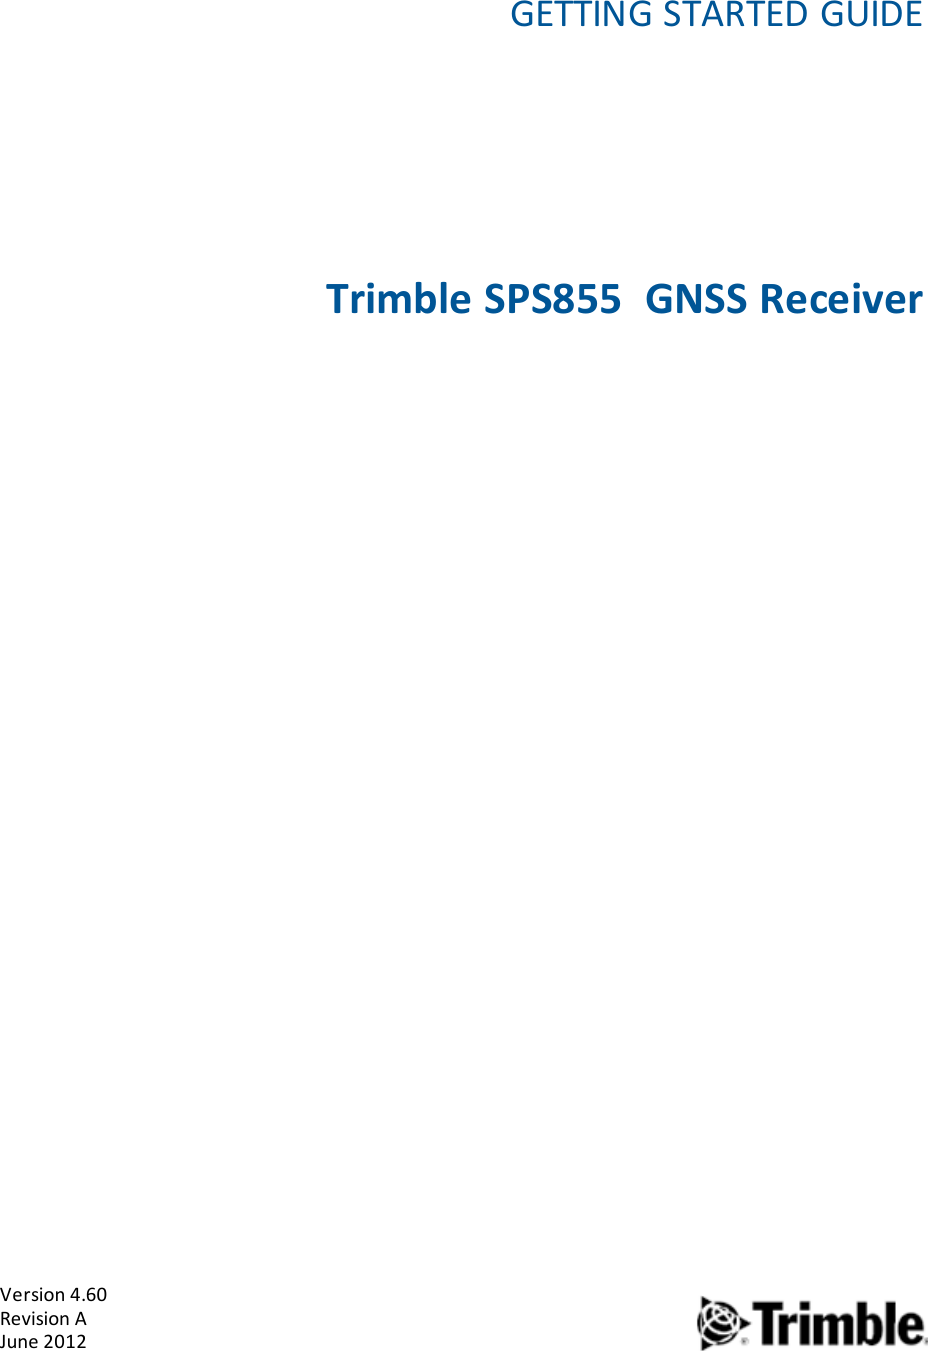 Version 4.60Revision AJune 20121GETTING STARTED GUIDETrimble SPS855 GNSS Receiver1